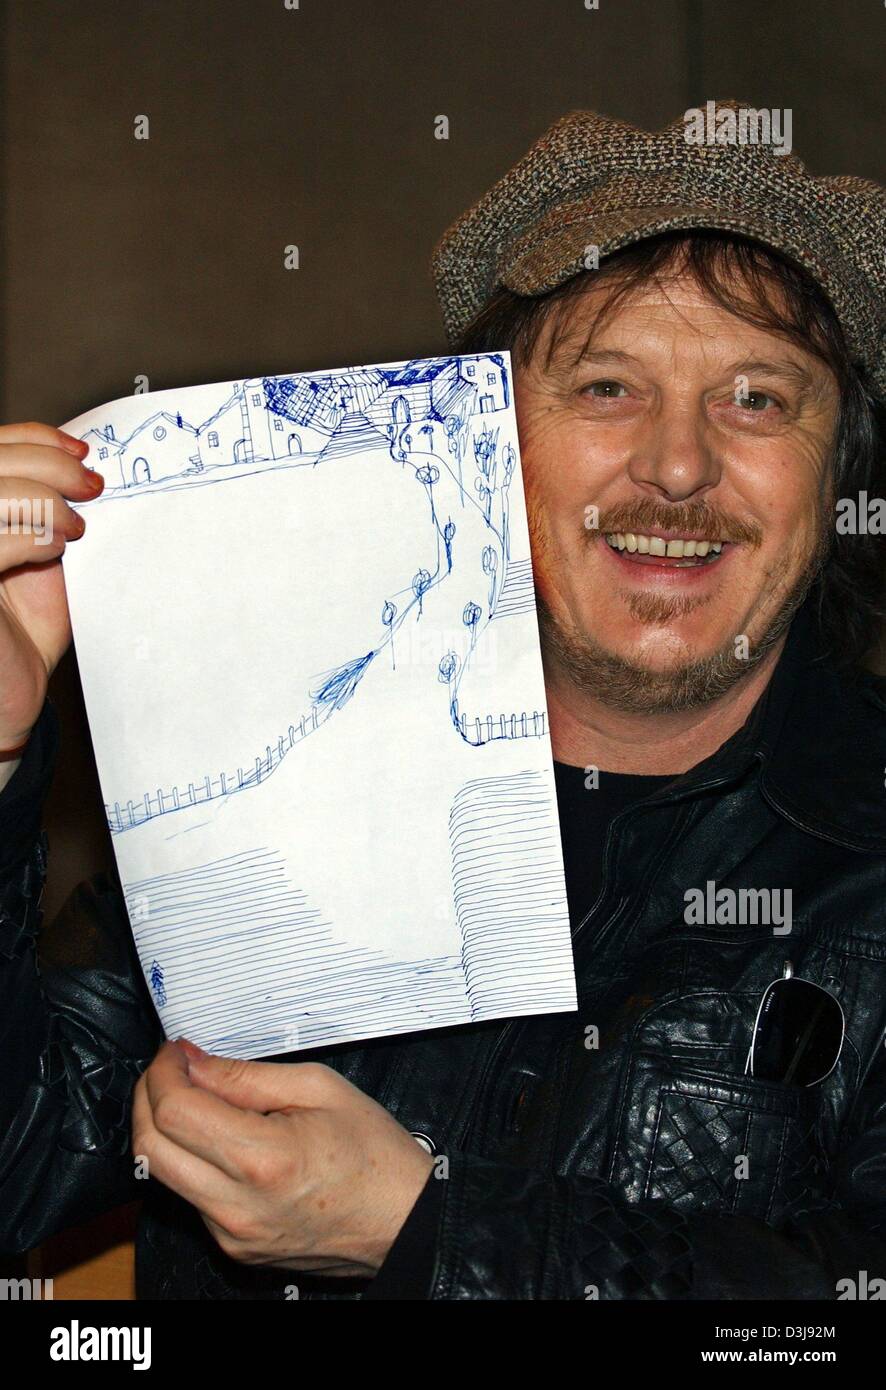 (dpa) - Italian musician, blues singer and song writer Zucchero smiles as he presents his drawing titled 'my farm in Italy' in a hotel in Hamburg, Germany, 22 April 2004. 48-year-old musician promoted his new album which contains a collection of duets with international singers. The album, which took him 15 years to produce, will be officially introduced during a UN charity concert Stock Photo